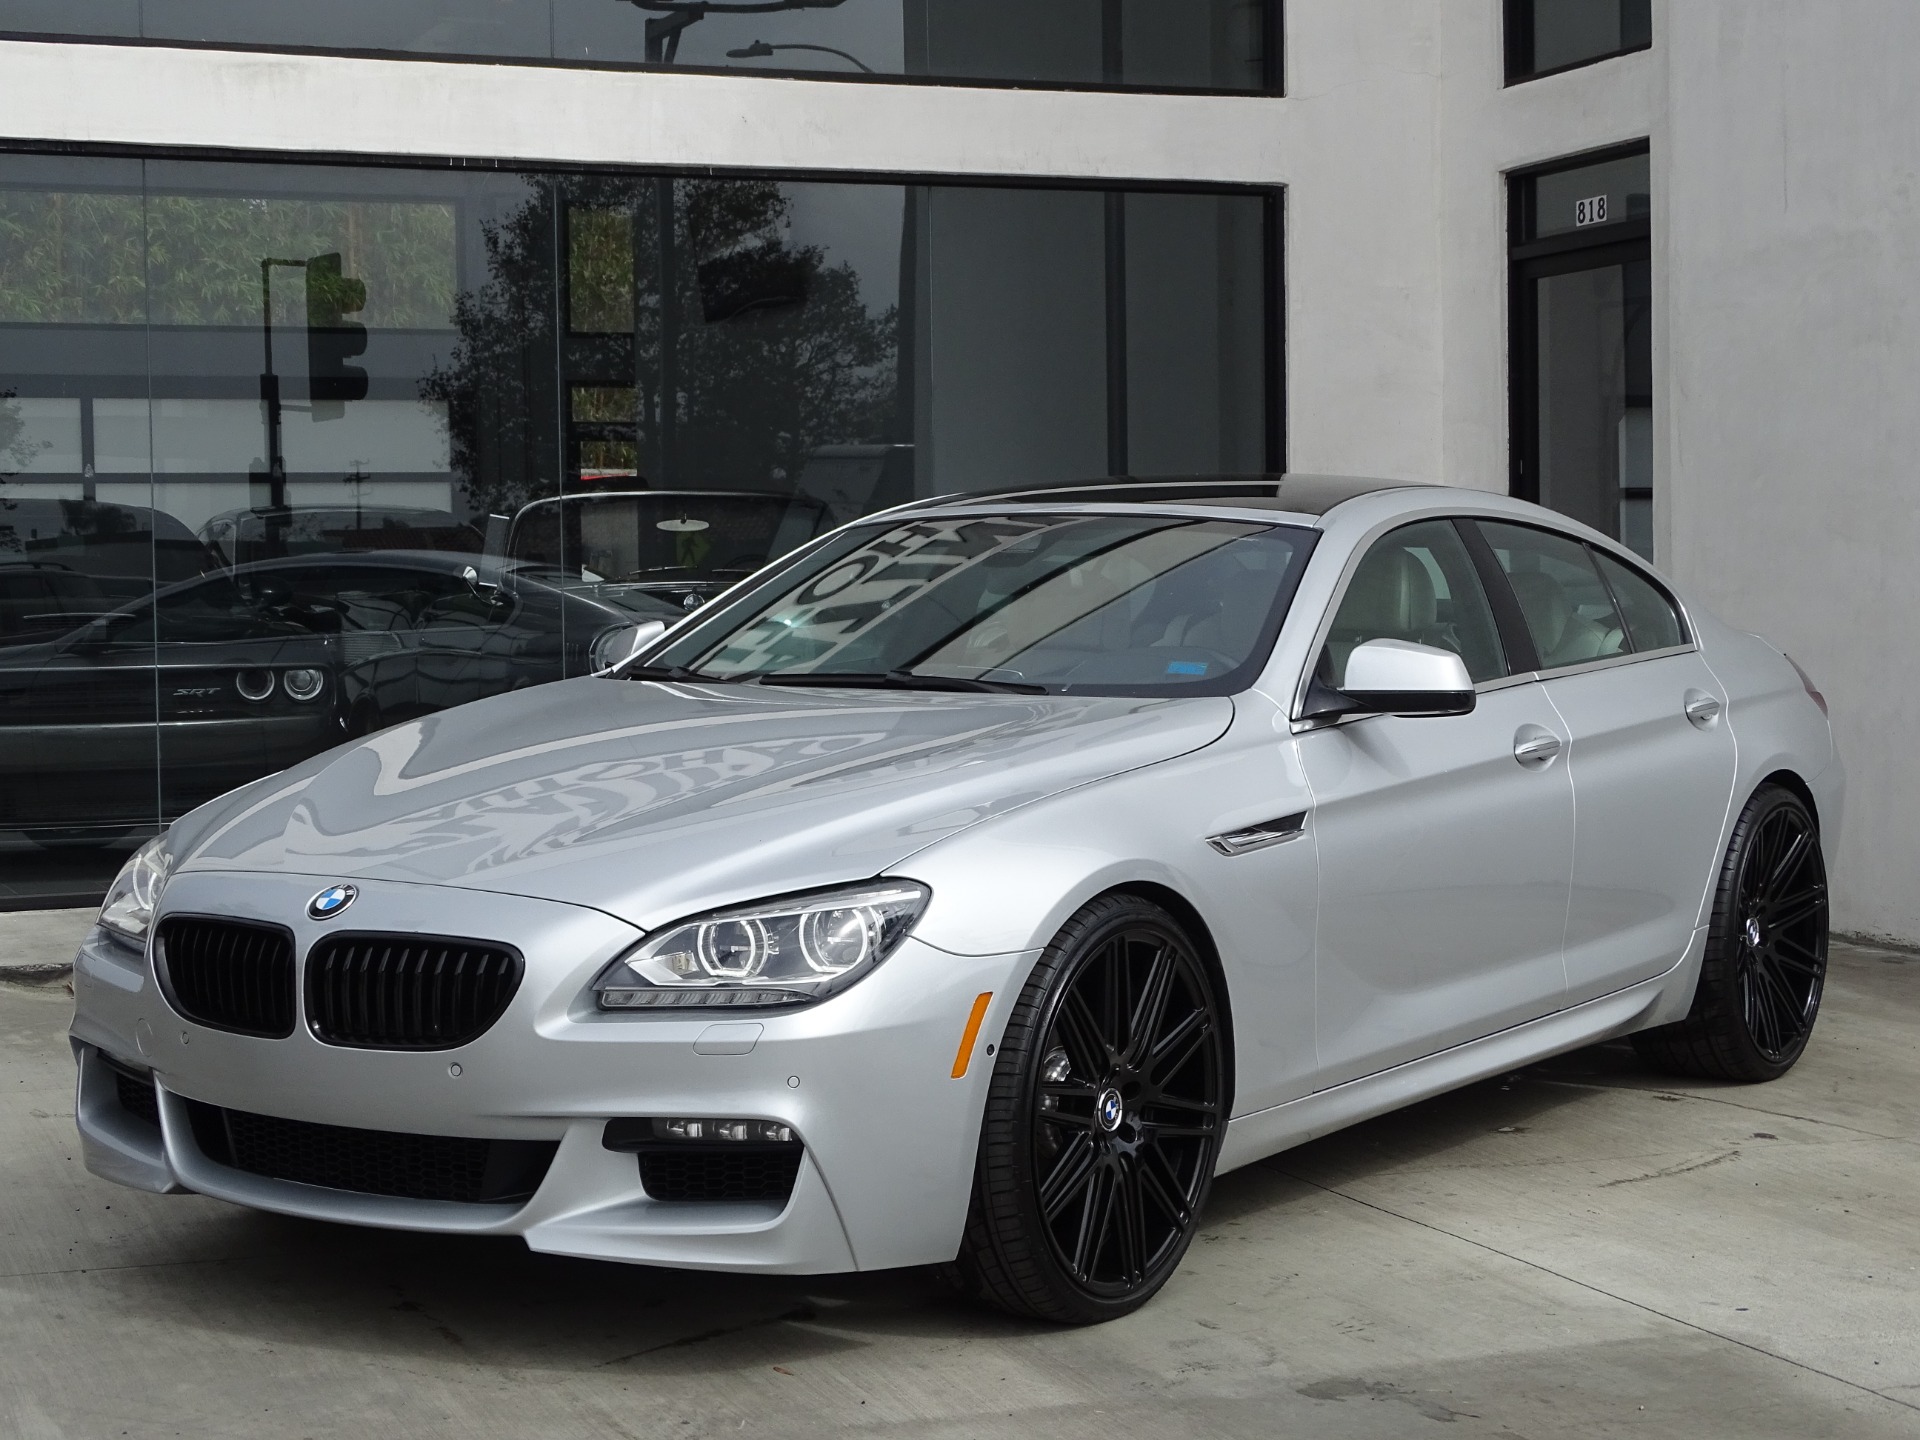 2013 BMW 6 Series 650i Gran Coupe *** M SPORT PACKAGE ** Stock # 6201A for  sale near Redondo Beach, CA | CA BMW Dealer